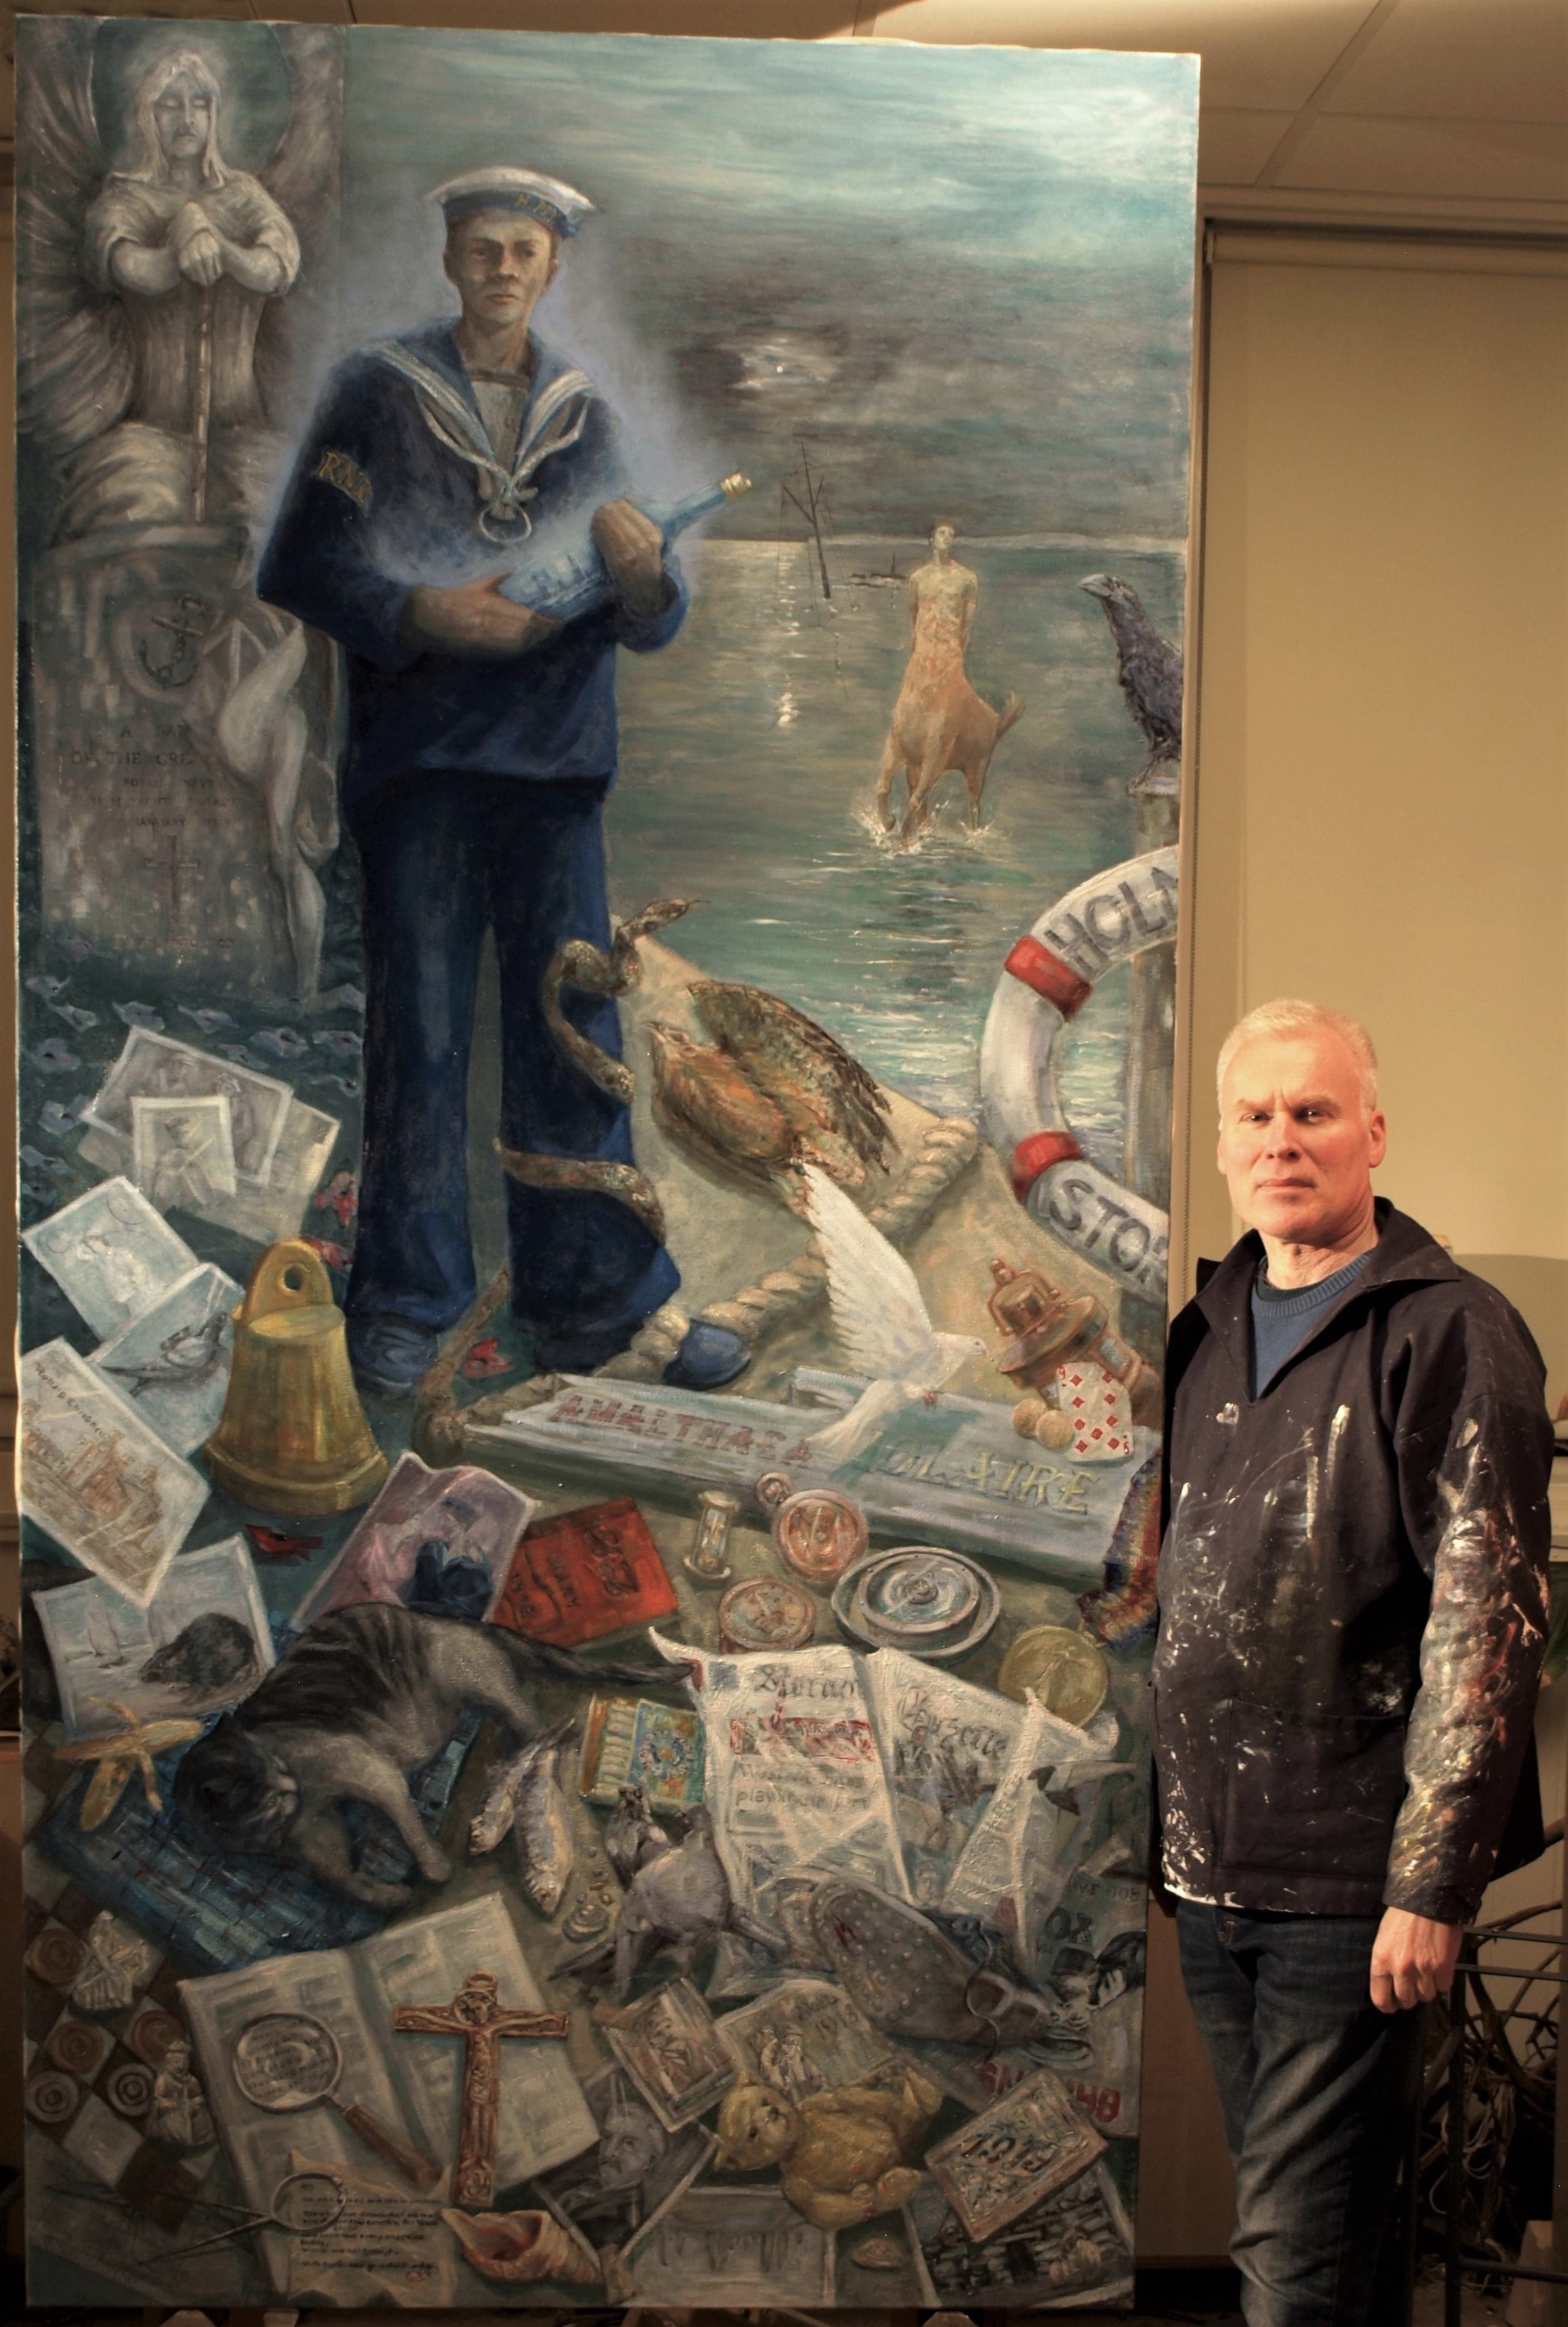 Artist William Wallace with his tribute to the sailors who perished in the Iolaire disaster nearly 100 years ago